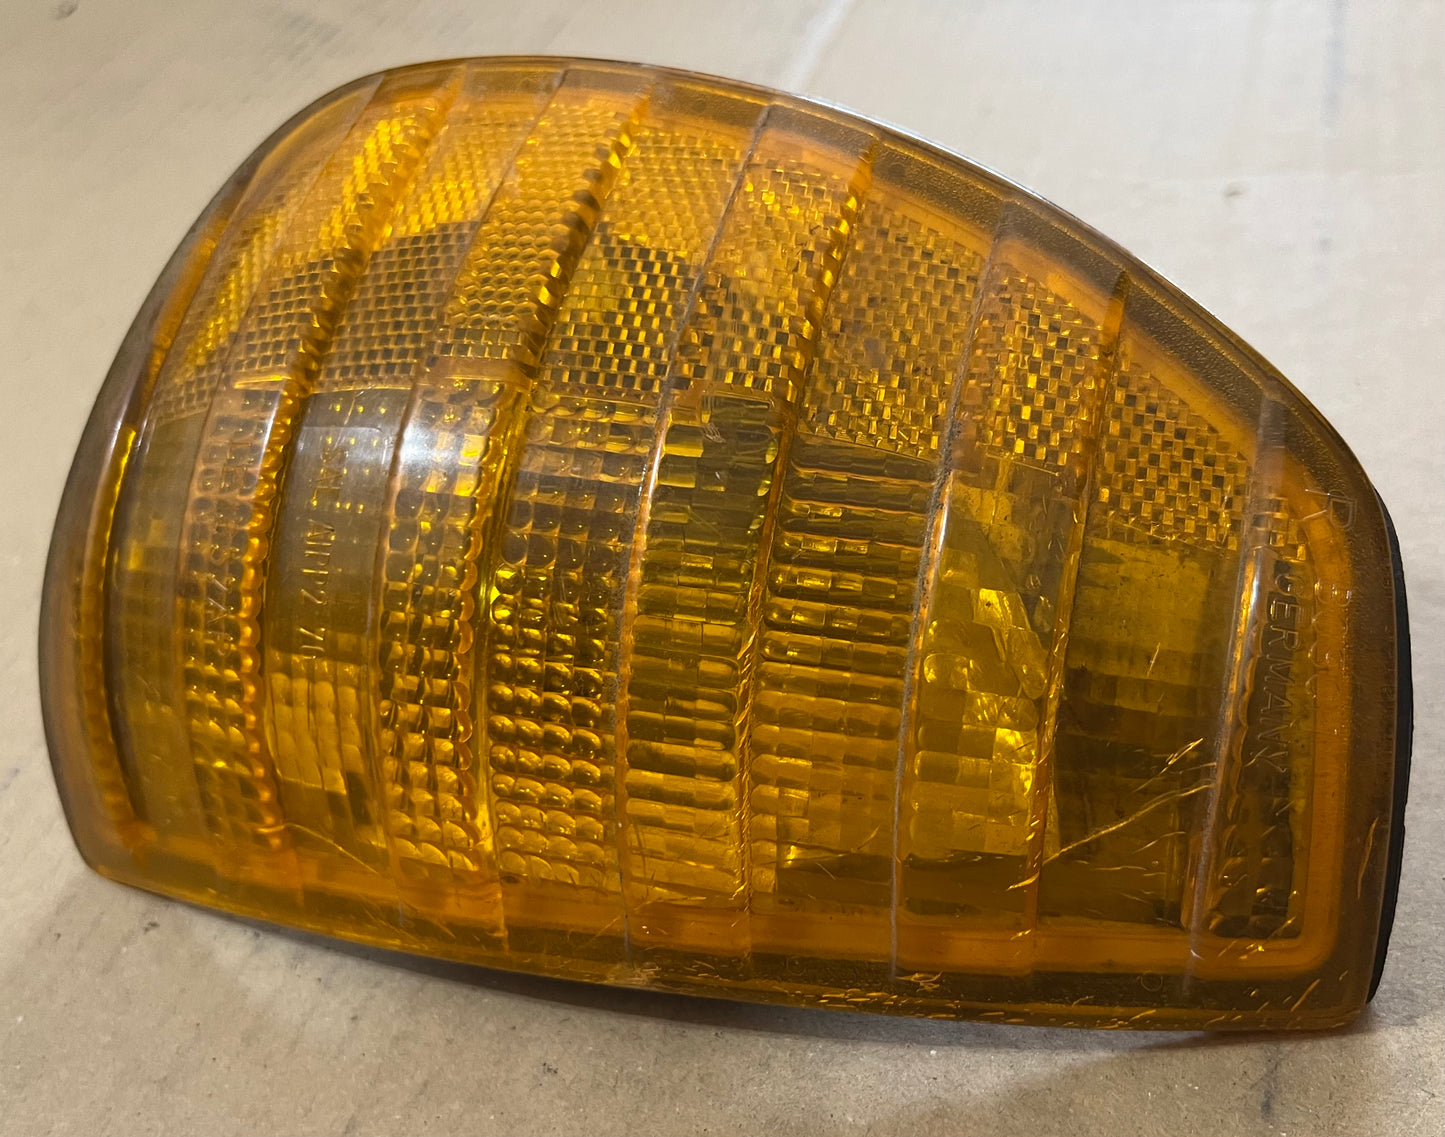 Used Mercedes-Benz Bosch Front Right Corner Turn Signal Light W123